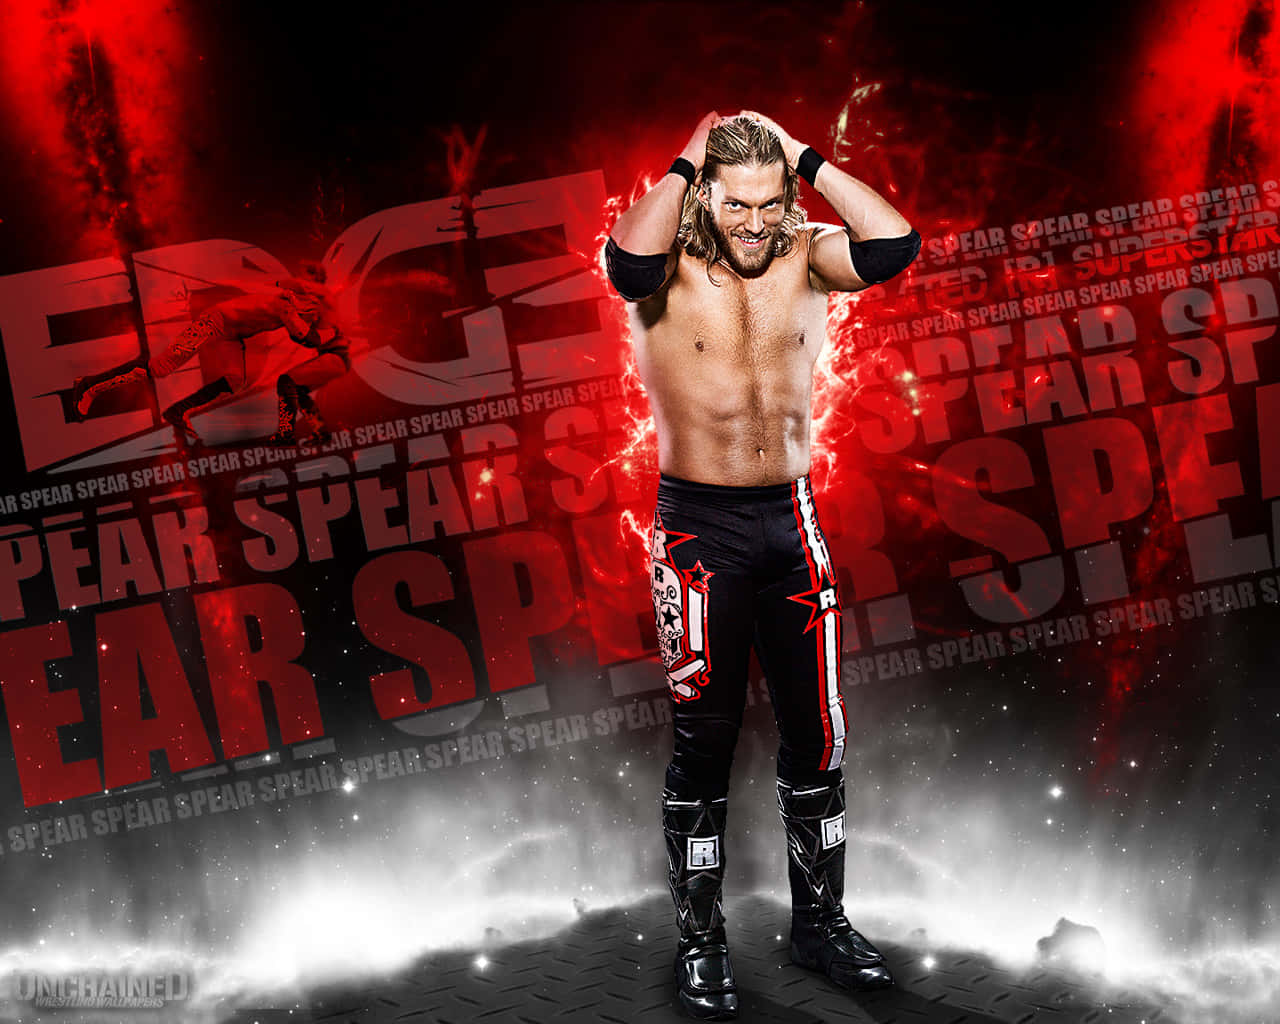 "Ready for the show? It's time for Cool Wwe!" Wallpaper